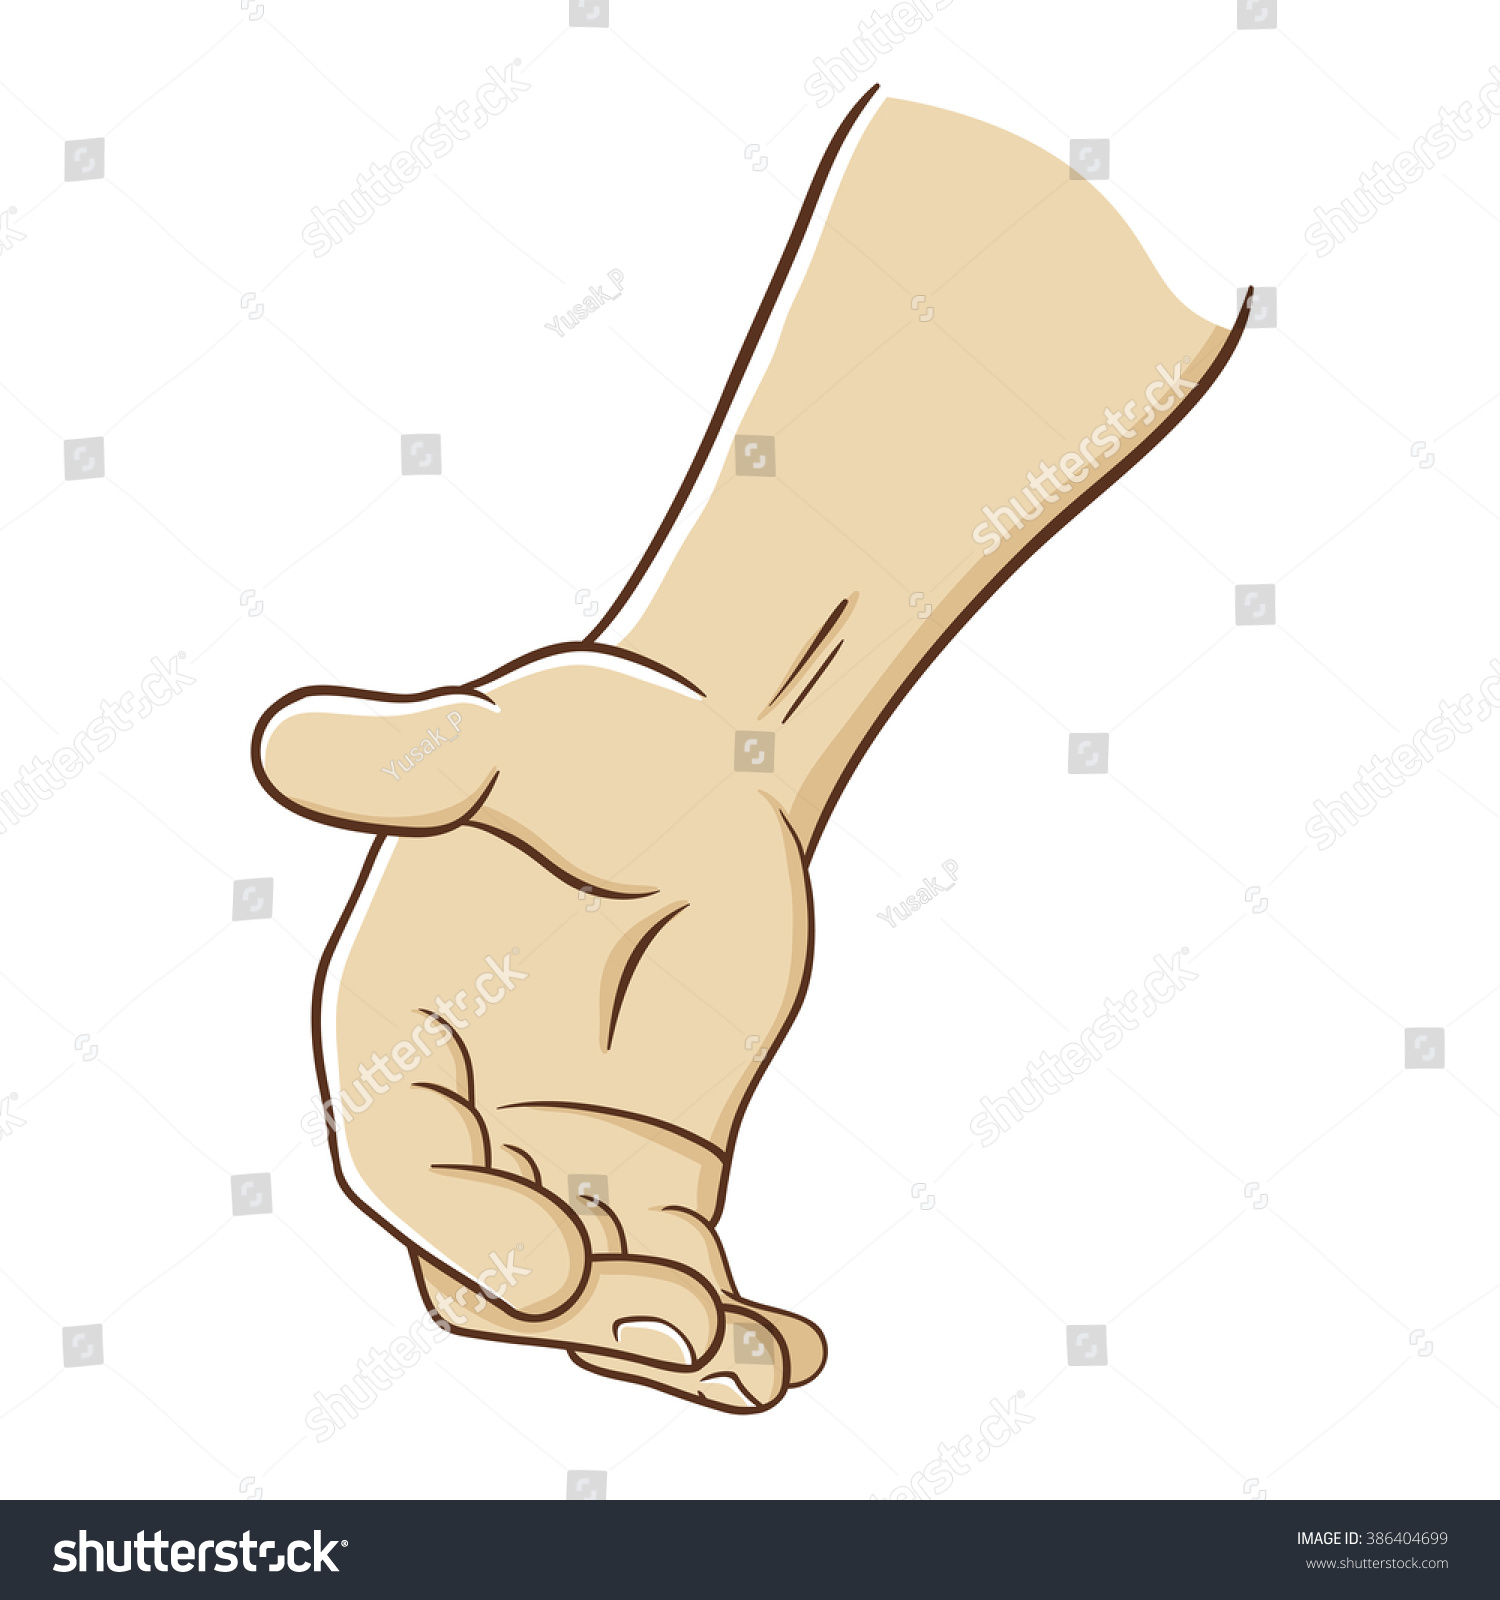 Cartoon Hand Reaching Out Offering Help Stock Vector (Royalty Free) 3864046...